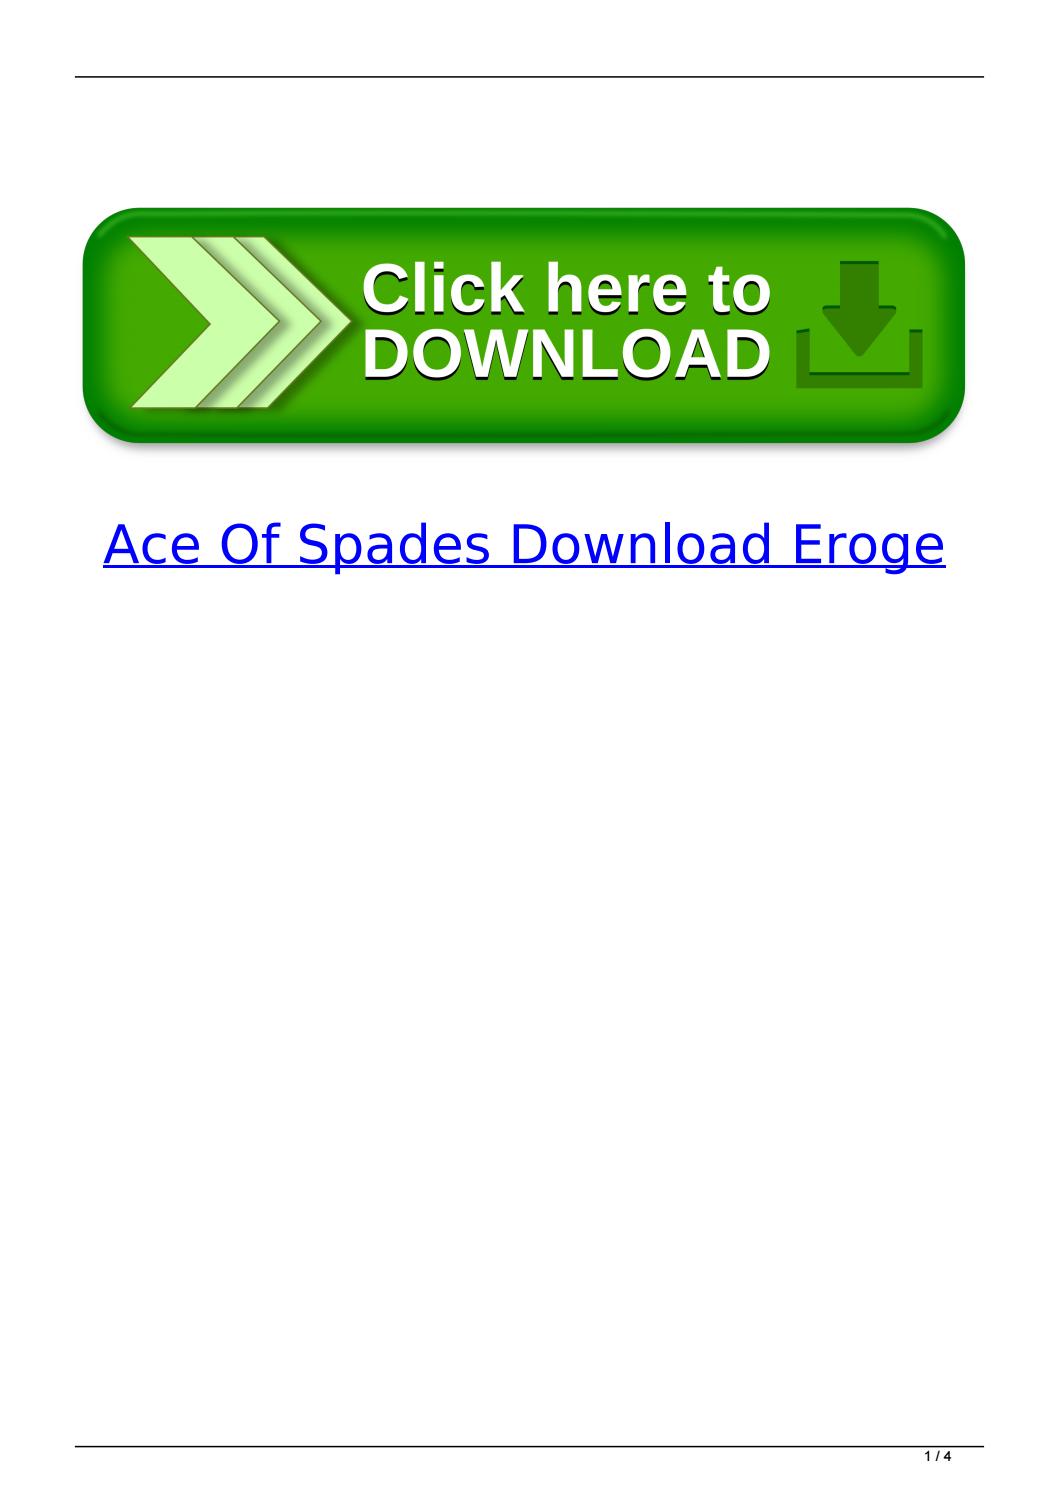 Ace Of Spades Download Eroge by backporili   issuu